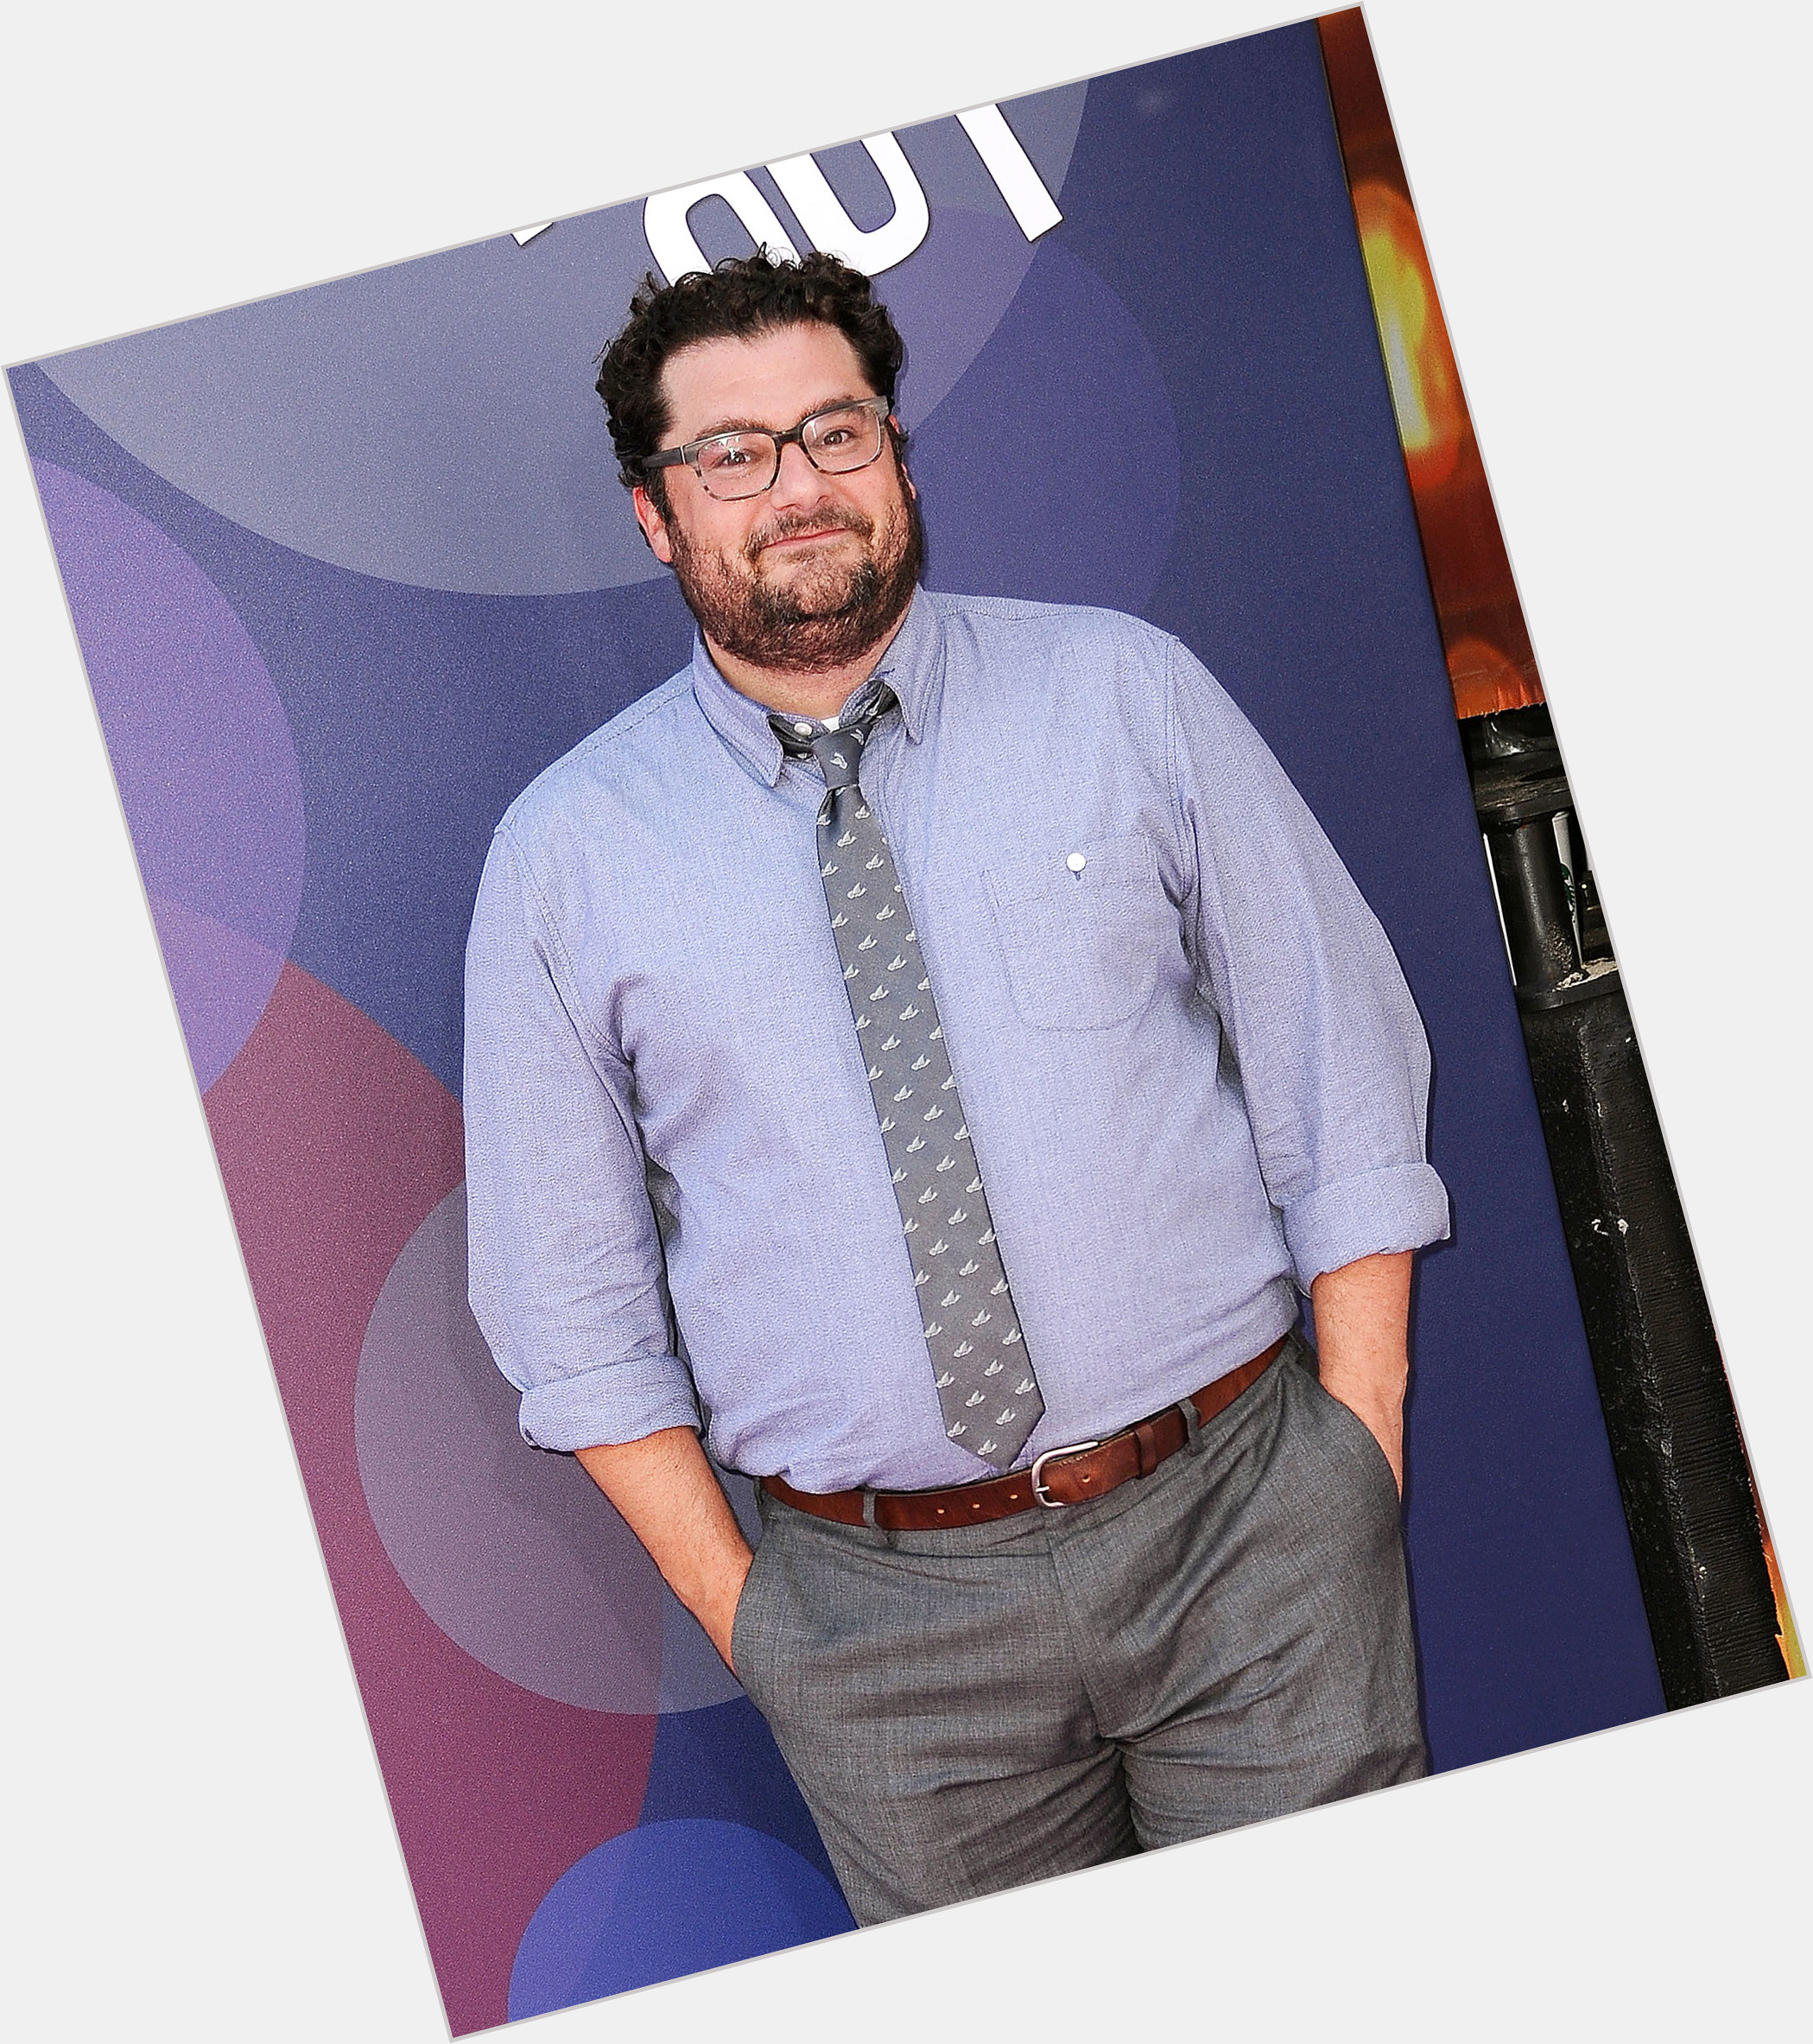 <a href="/hot-men/bobby-moynihan/is-he-married-leaving-snl-related-chris-farley">Bobby Moynihan</a> Large body,  light brown hair & hairstyles